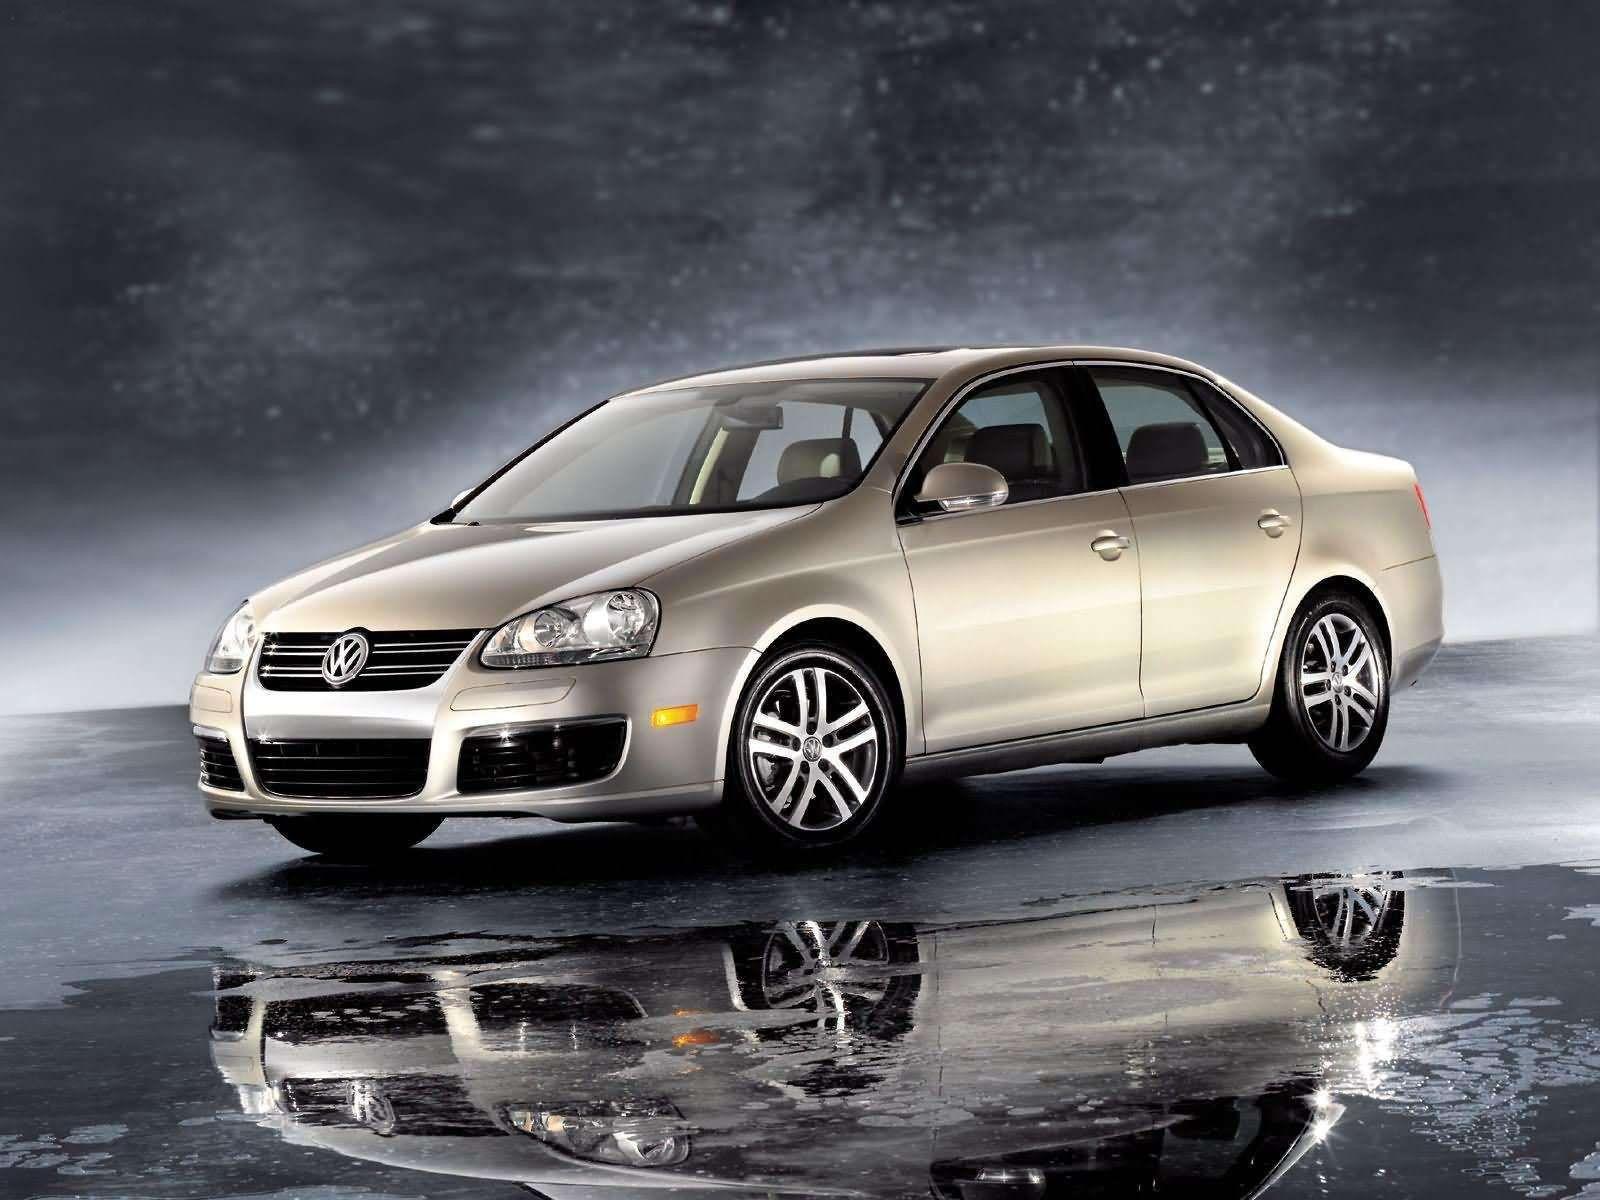 New car Volkswagen Jetta wallpapers and image